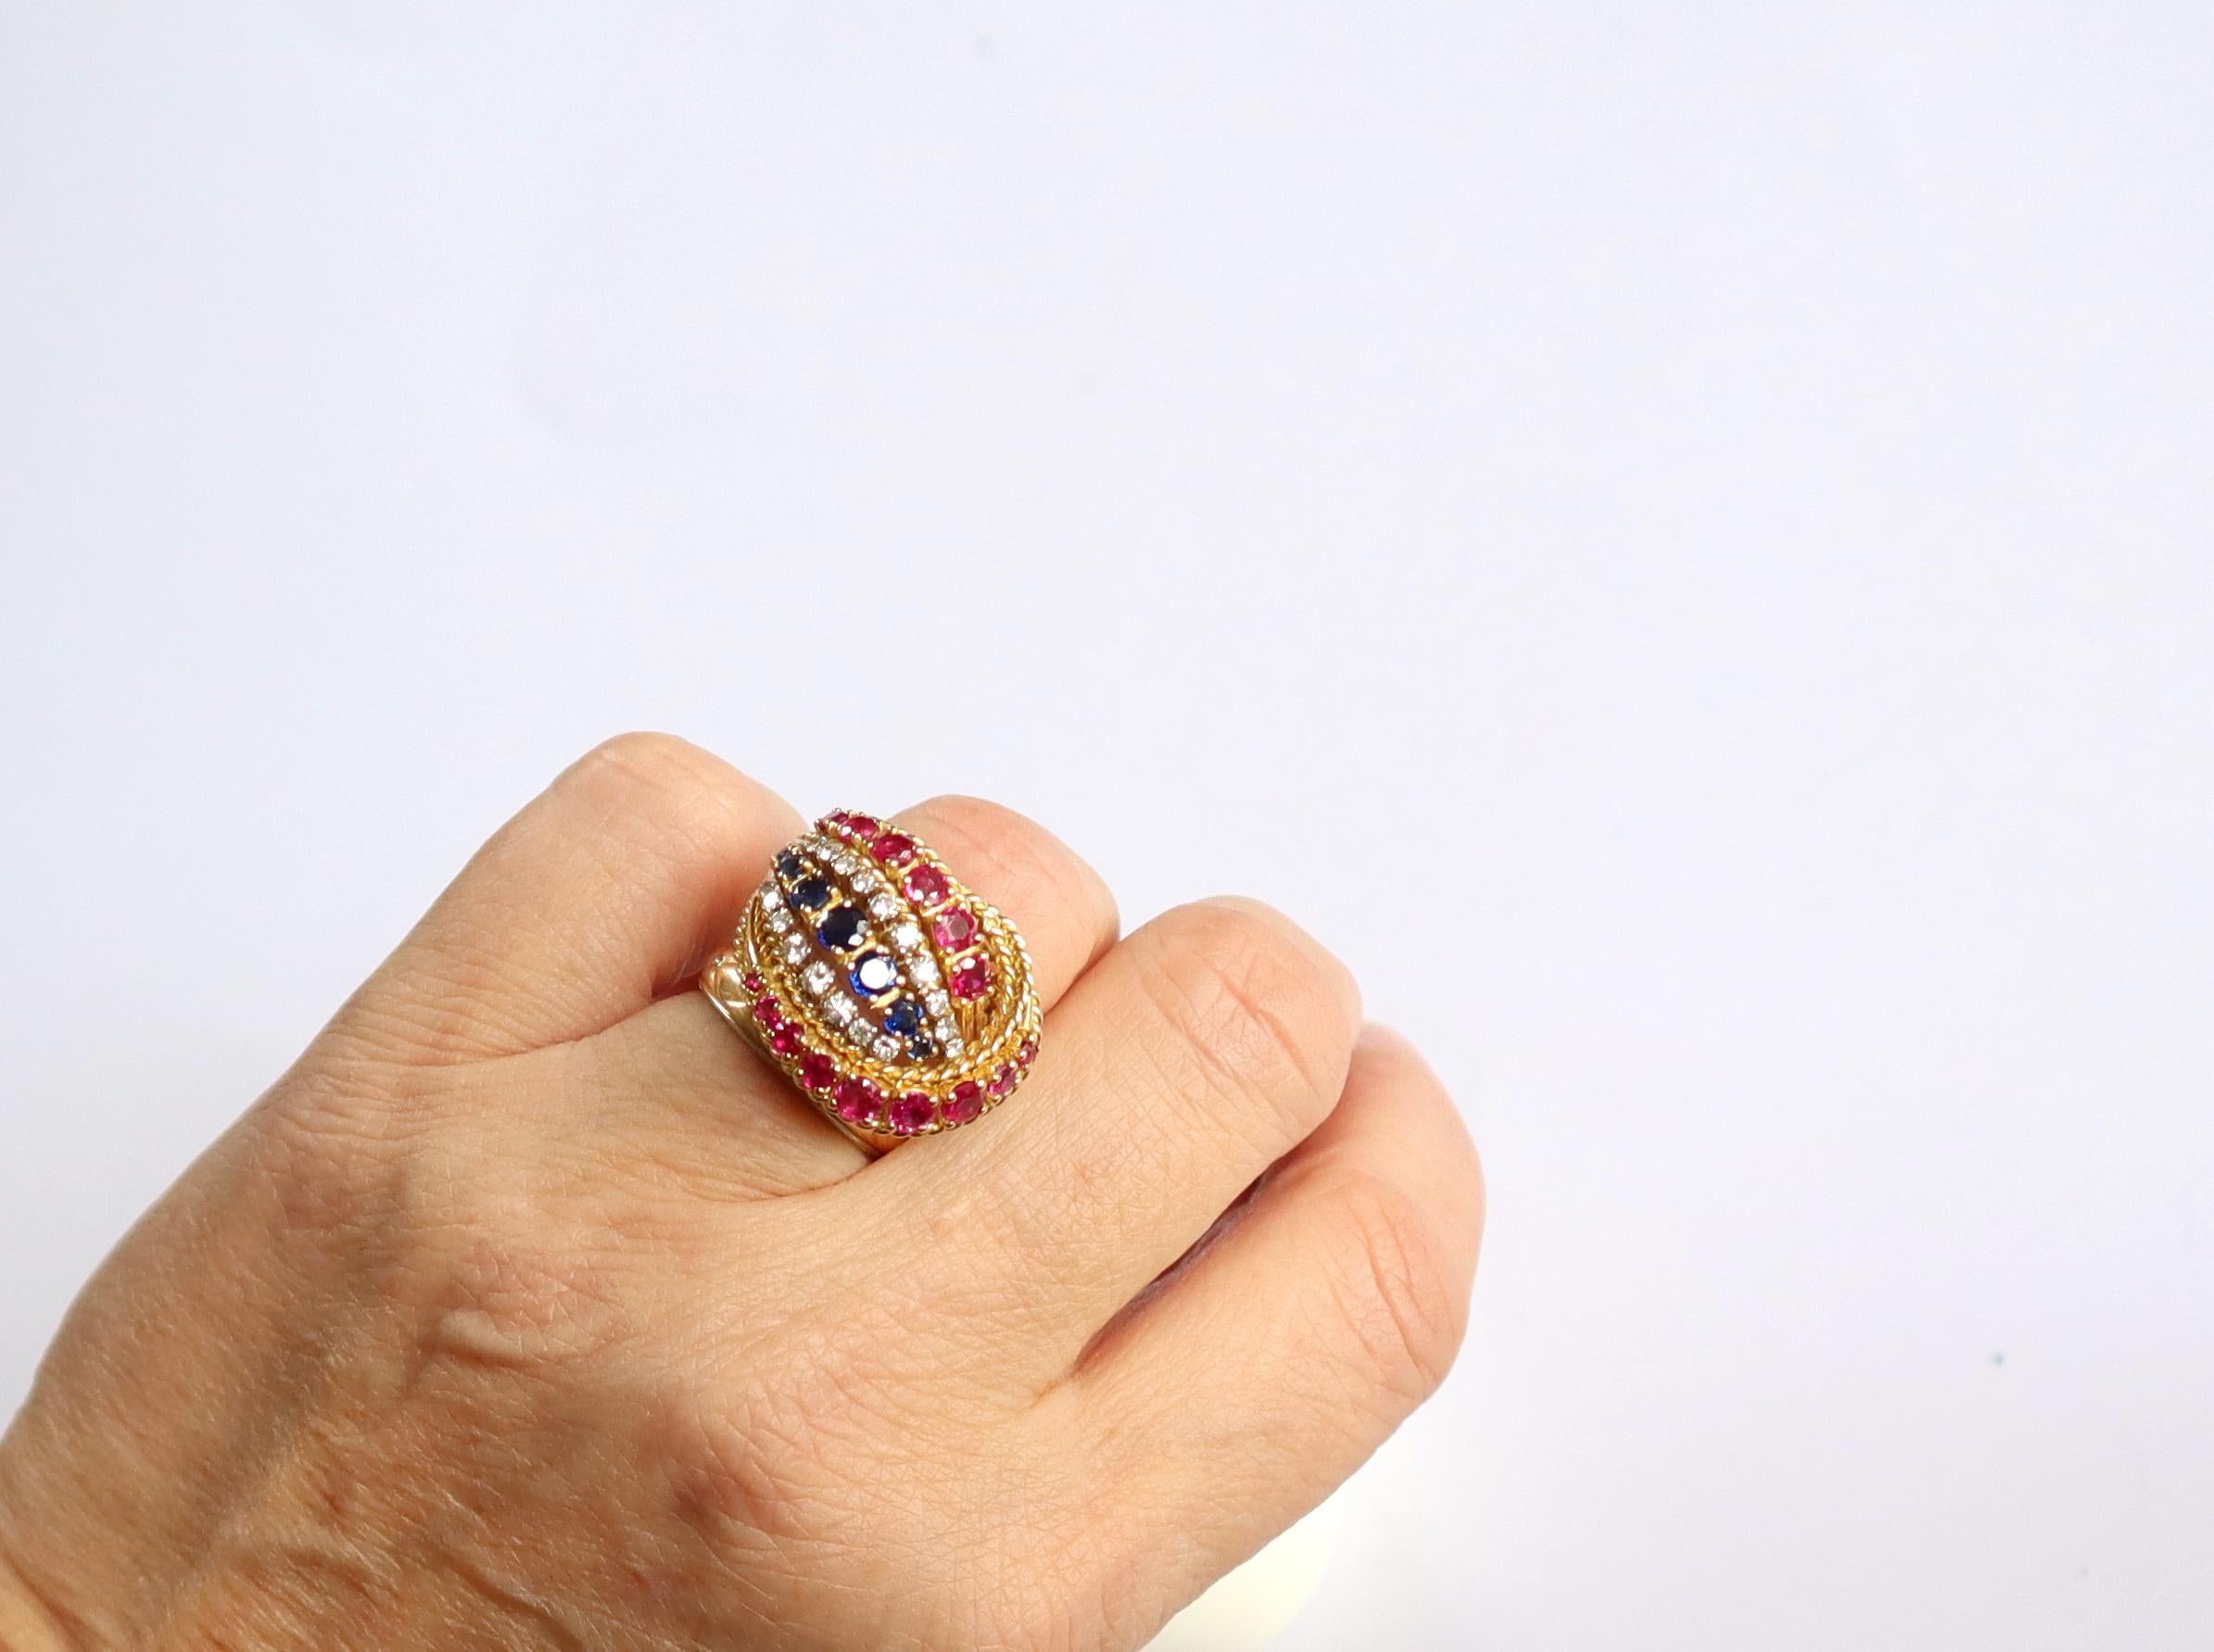 Lovely 1950s ring drawing a knot of twisted 18 Kt (750°/ooo) yellow gold wires set with lines of sapphires, rubies and diamonds. Signature F.RO.
7 sapphires including 3 larger, 15 rubies including 8 larger, 18 diamonds
Eagle's Head hallmark for